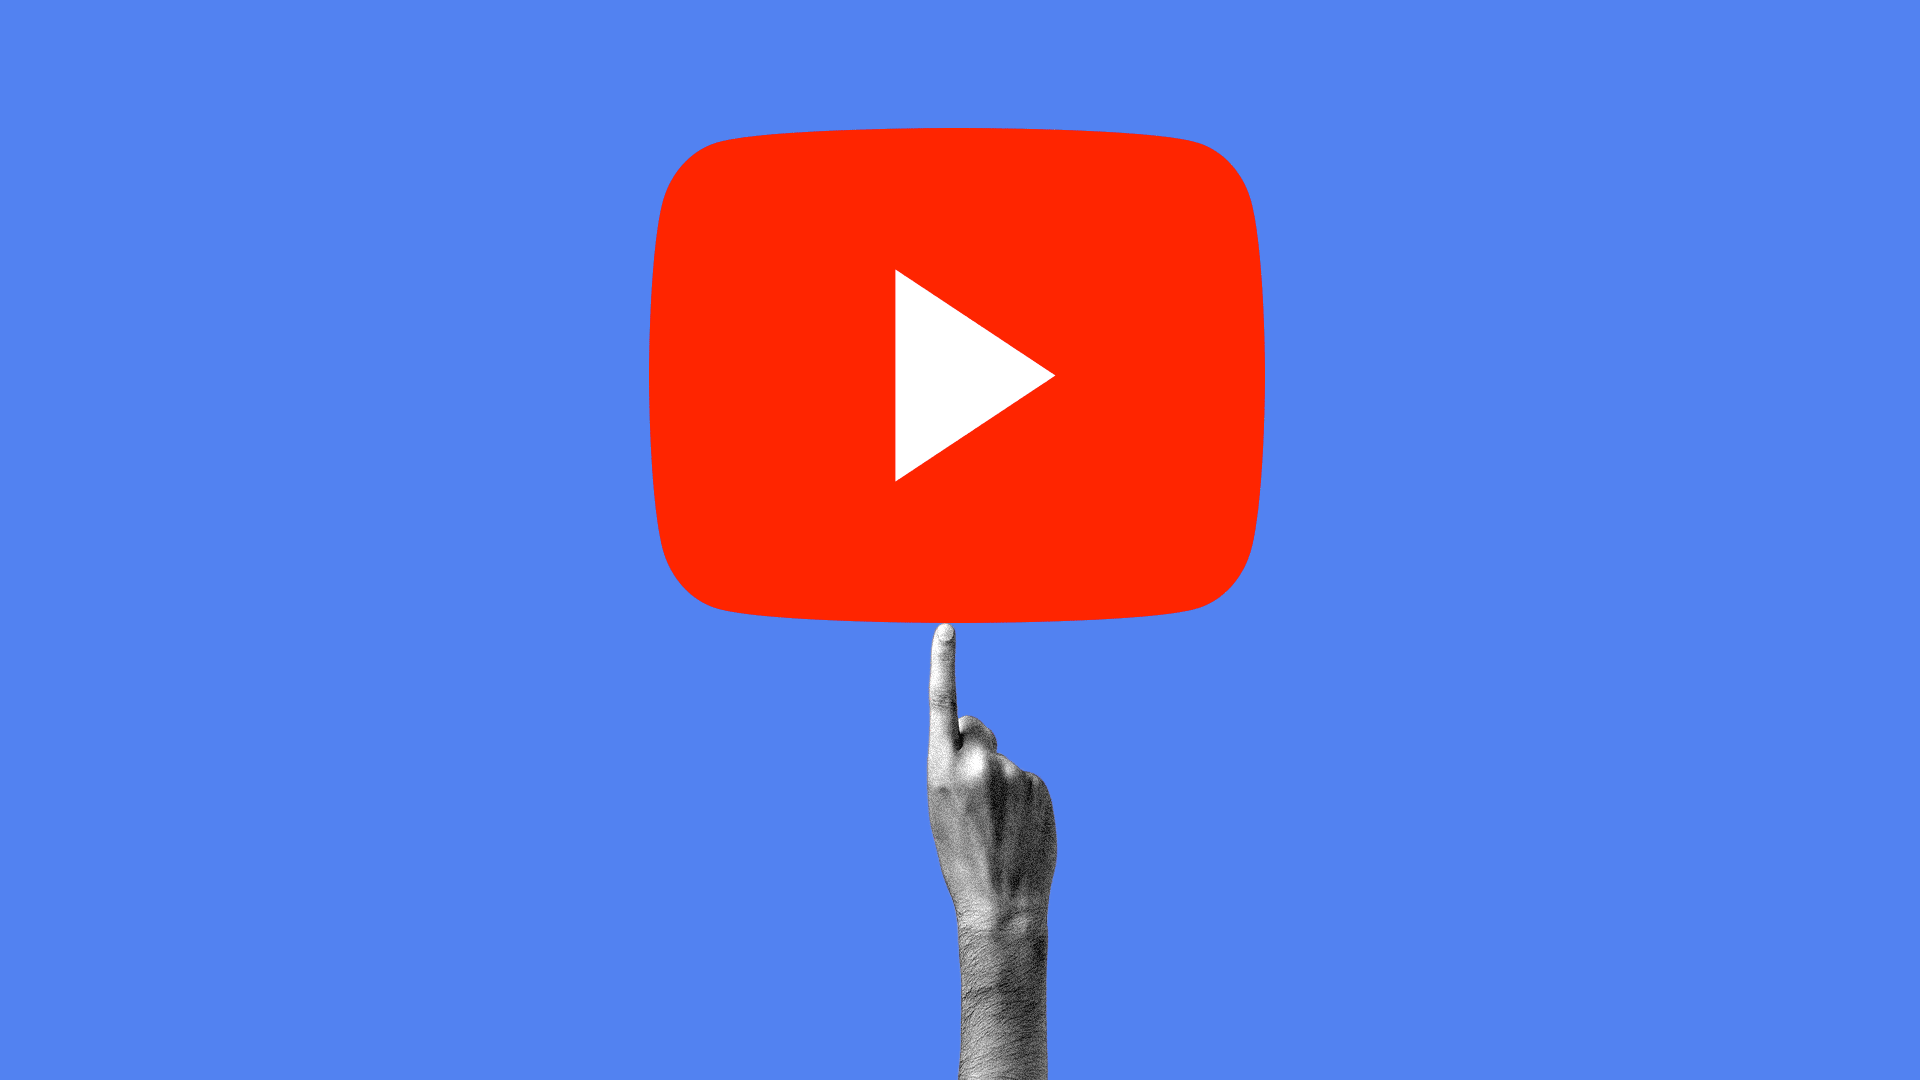 Scoop: YouTube reverses misinformation policy to allow U.S. election denialism